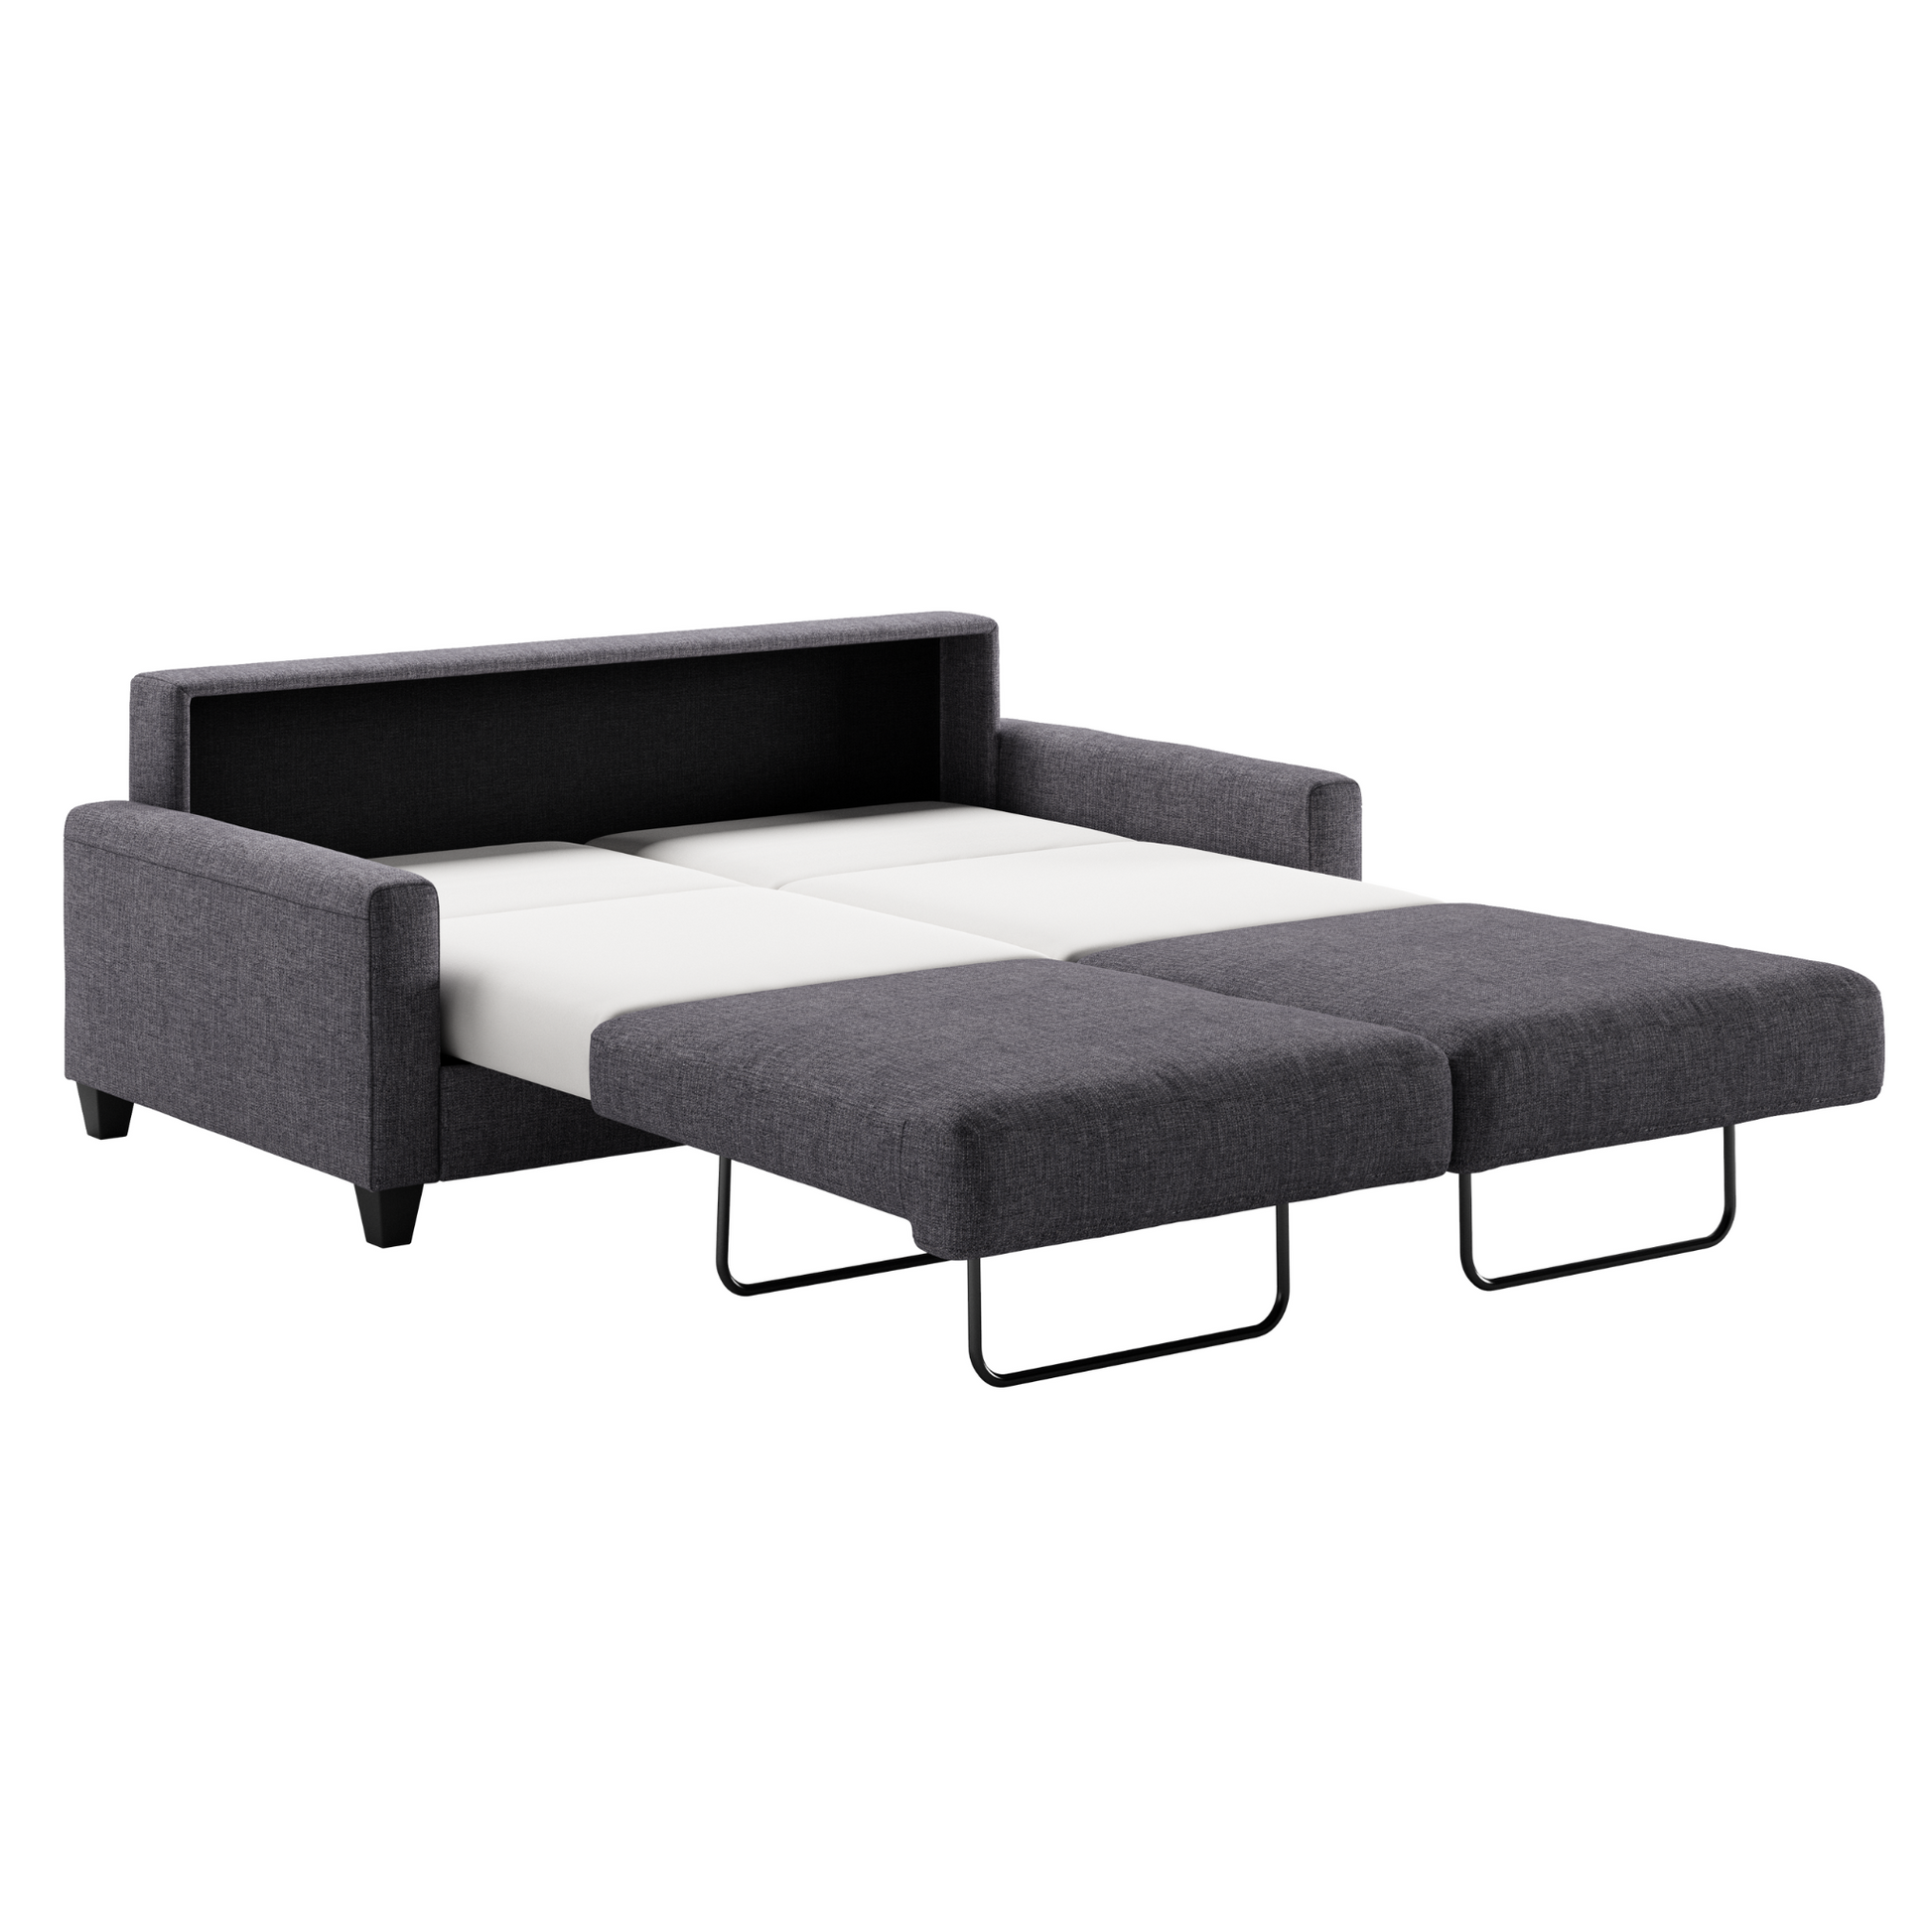 Luonto Nico Queen Sleeper Sofa Quick Ship Program in Rene 04 Fabric (charcoal) with Wood Leg with Open Sleeper Bed